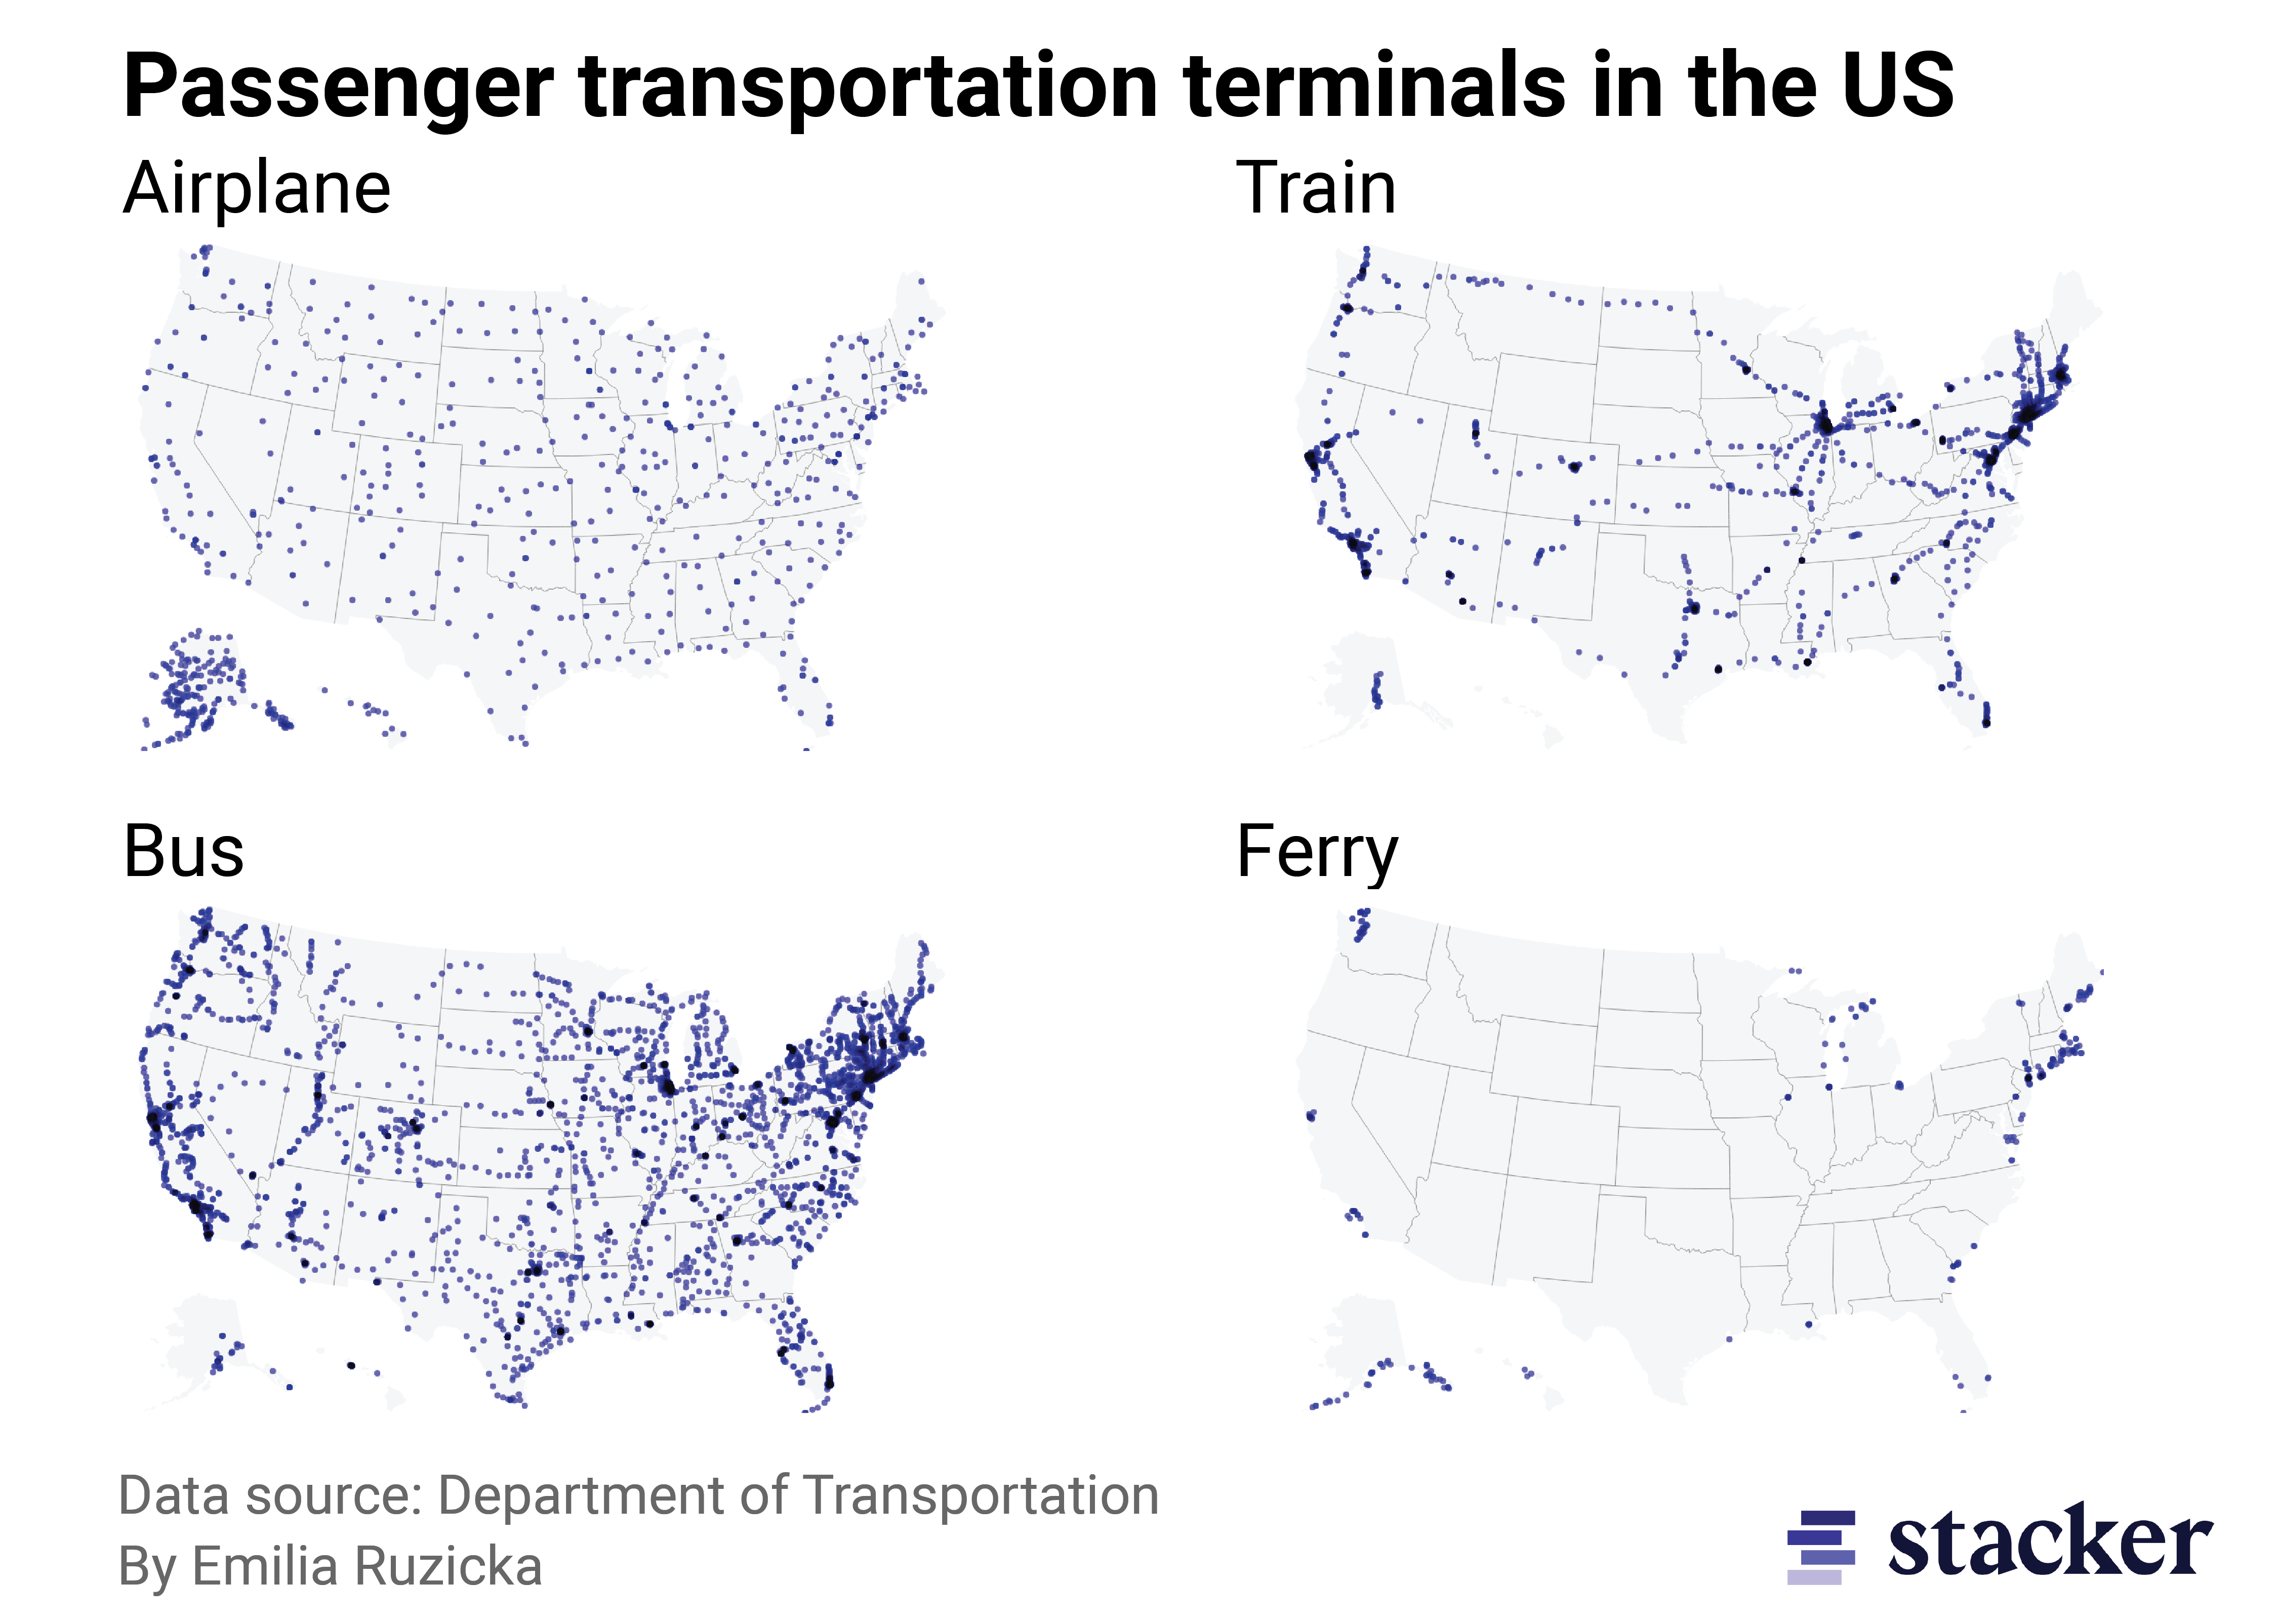 Four state-level maps of the U.S. showing passenger terminals for airplanes, trains, buses, and ferries.